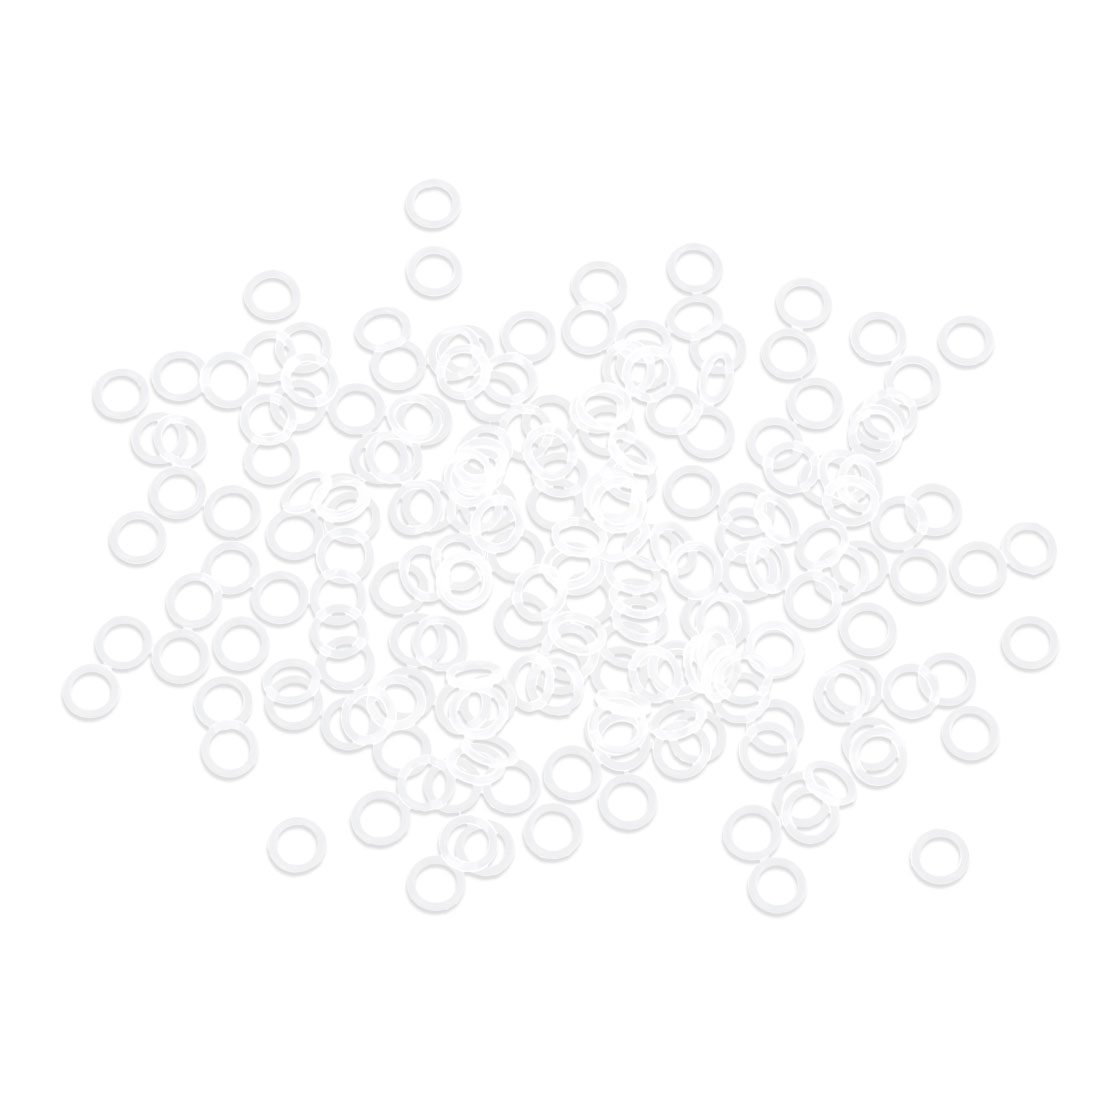 Unique Bargains 200pcs White Silicone Rubber Car O-Ring Seal Gasket Washer 6 x 1mm